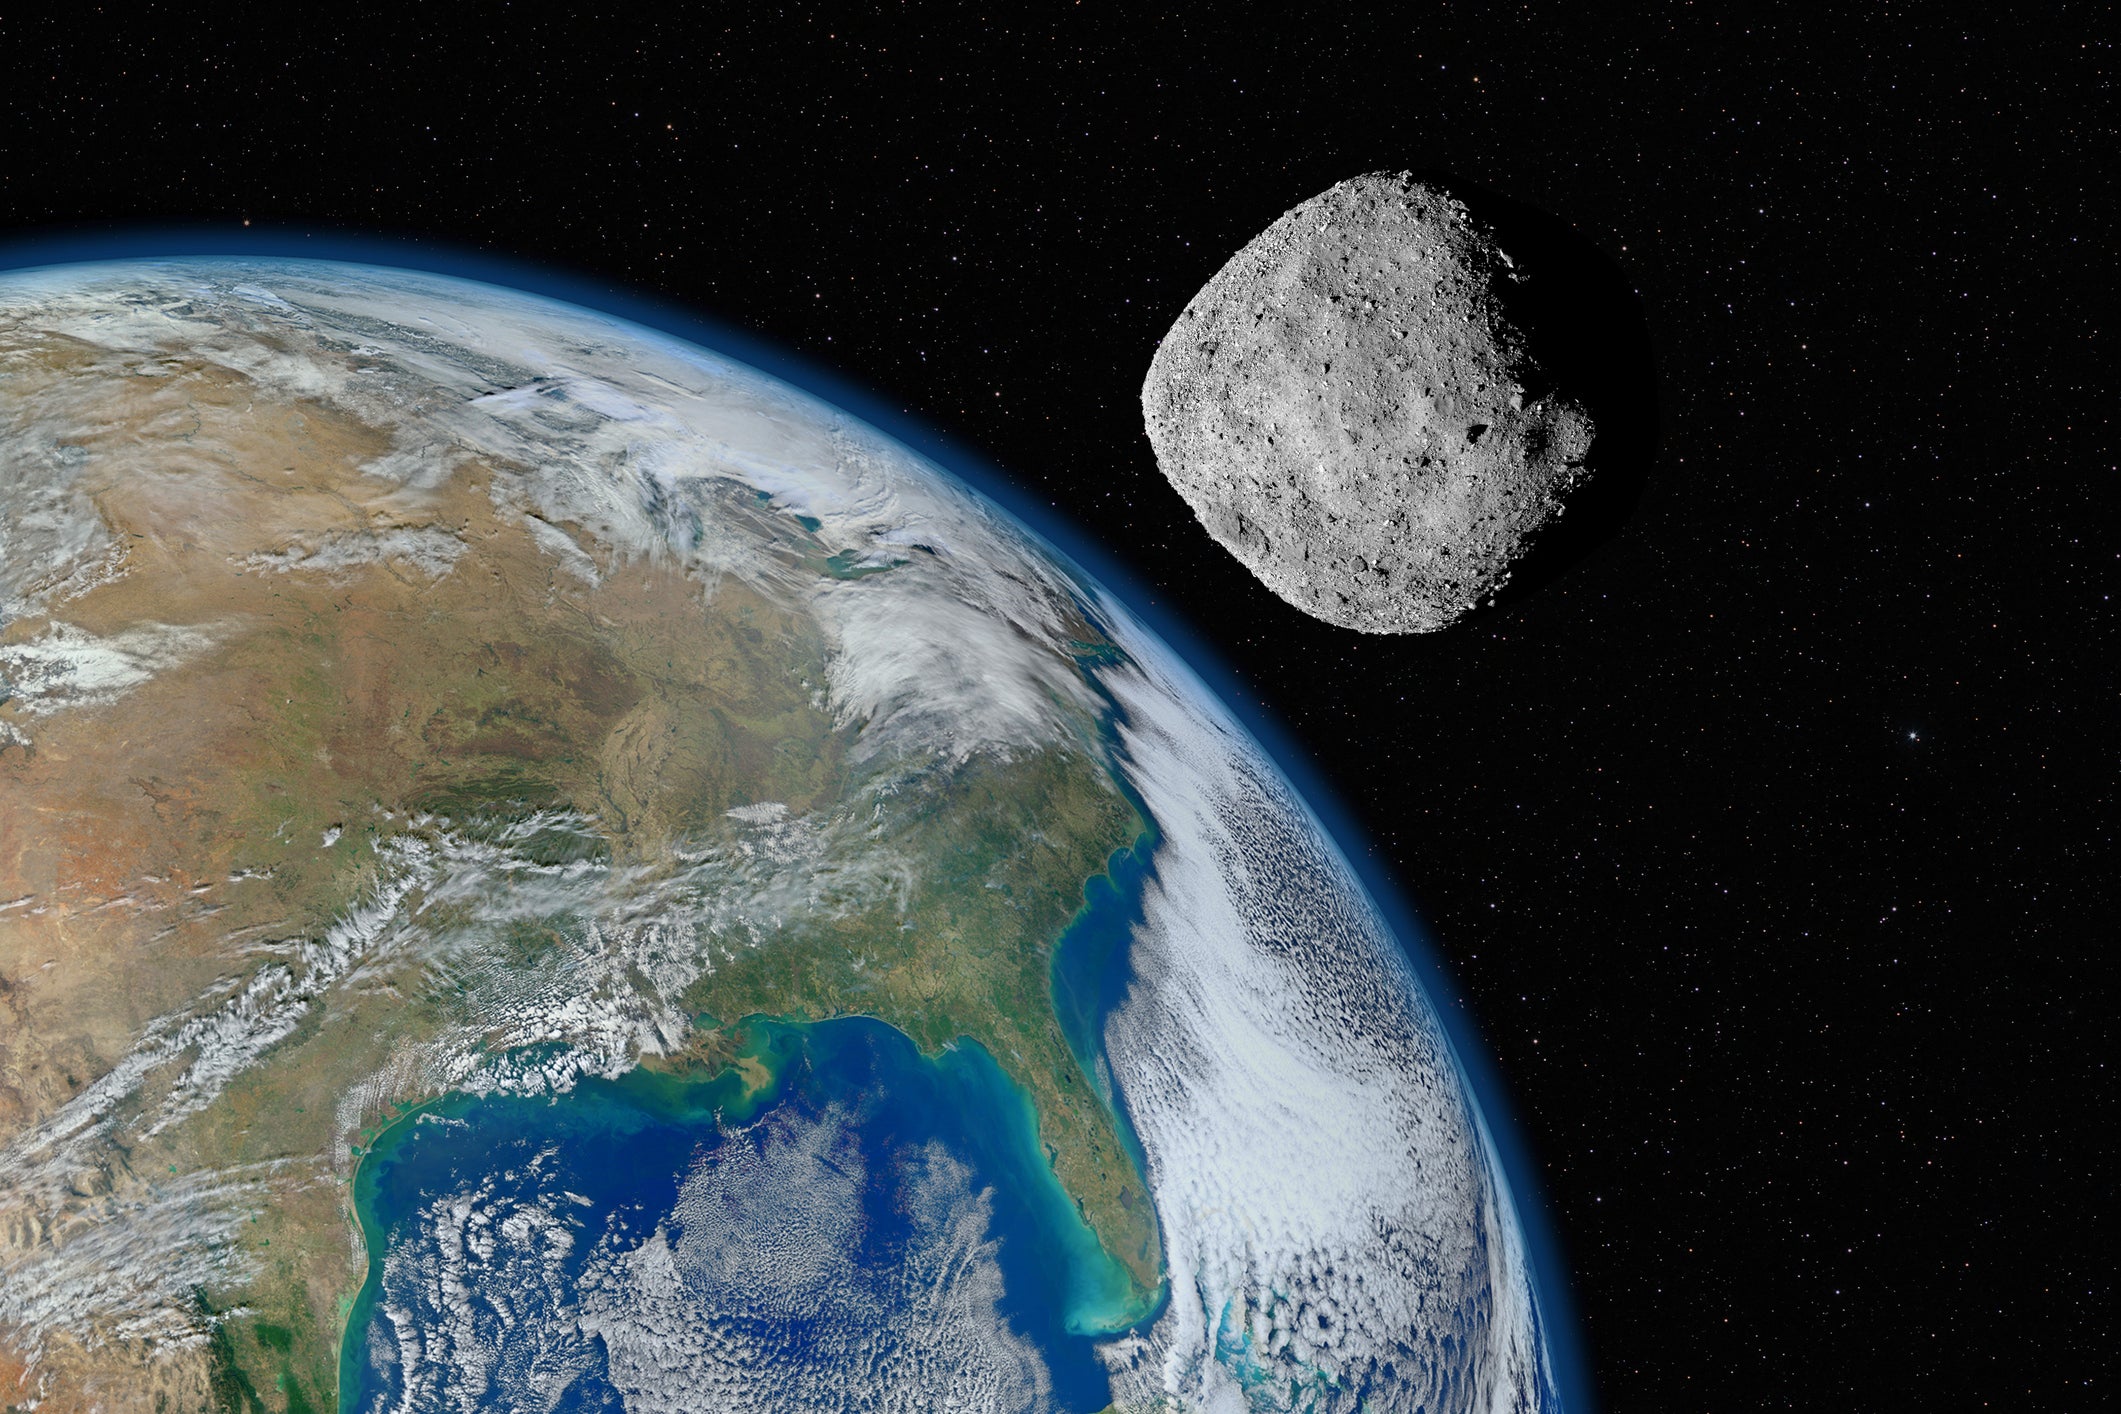 Scientists tried and failed to stop a ‘deadly asteroid strike’ in